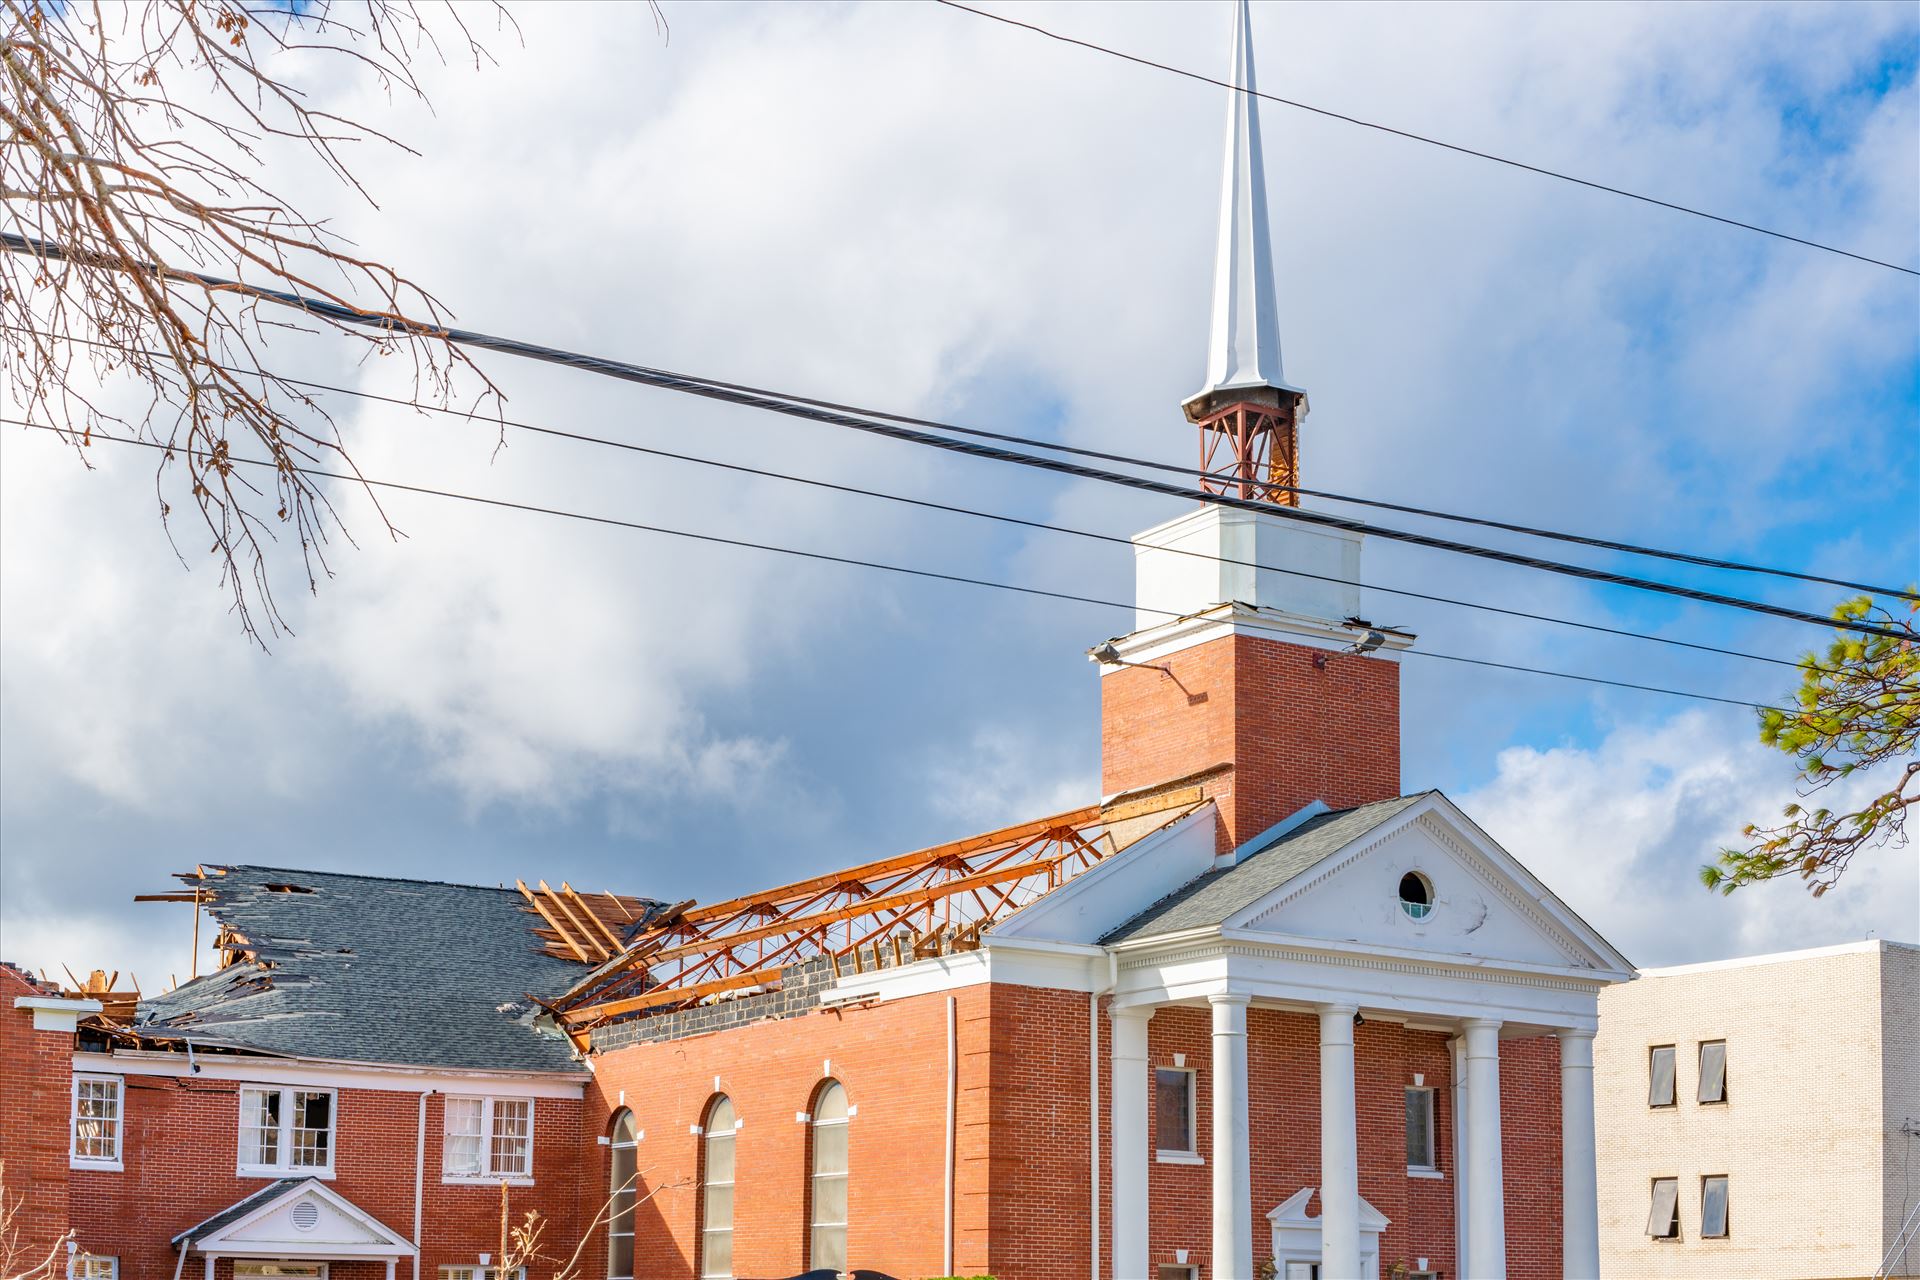 Hurricane Michael - Extensive damage done to the First Presbyterian Church, down town Panama City, Florida, from hurricane Michael by Terry Kelly Photography